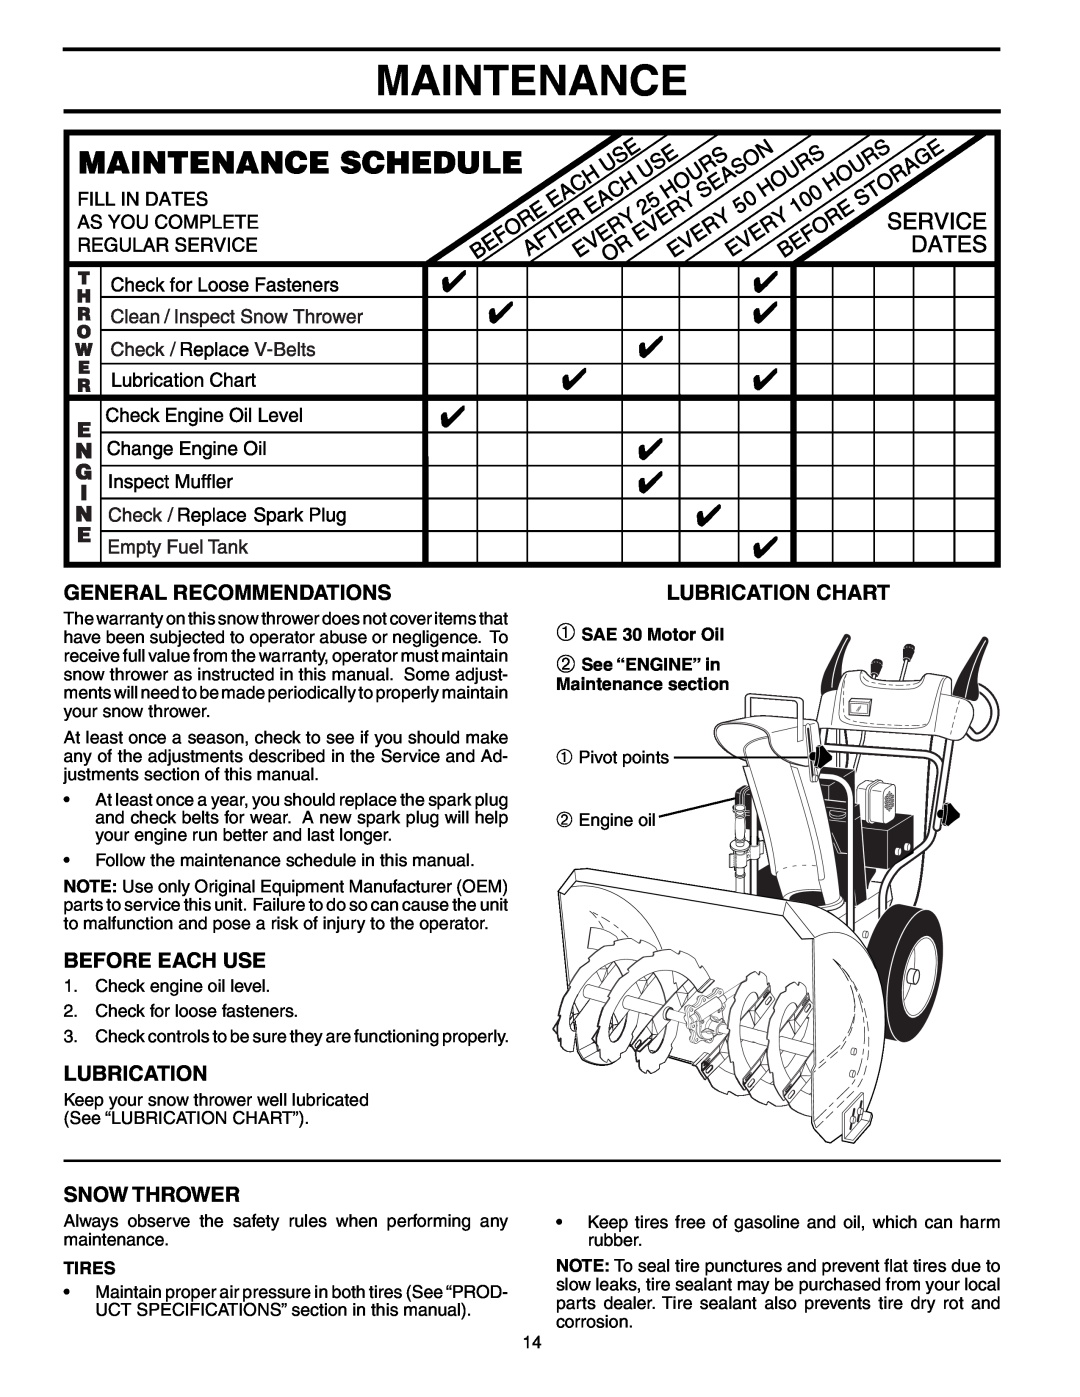 Poulan 192030 Maintenance, General Recommendations, Before Each Use, Snow Thrower, Lubrication Chart, Tires 